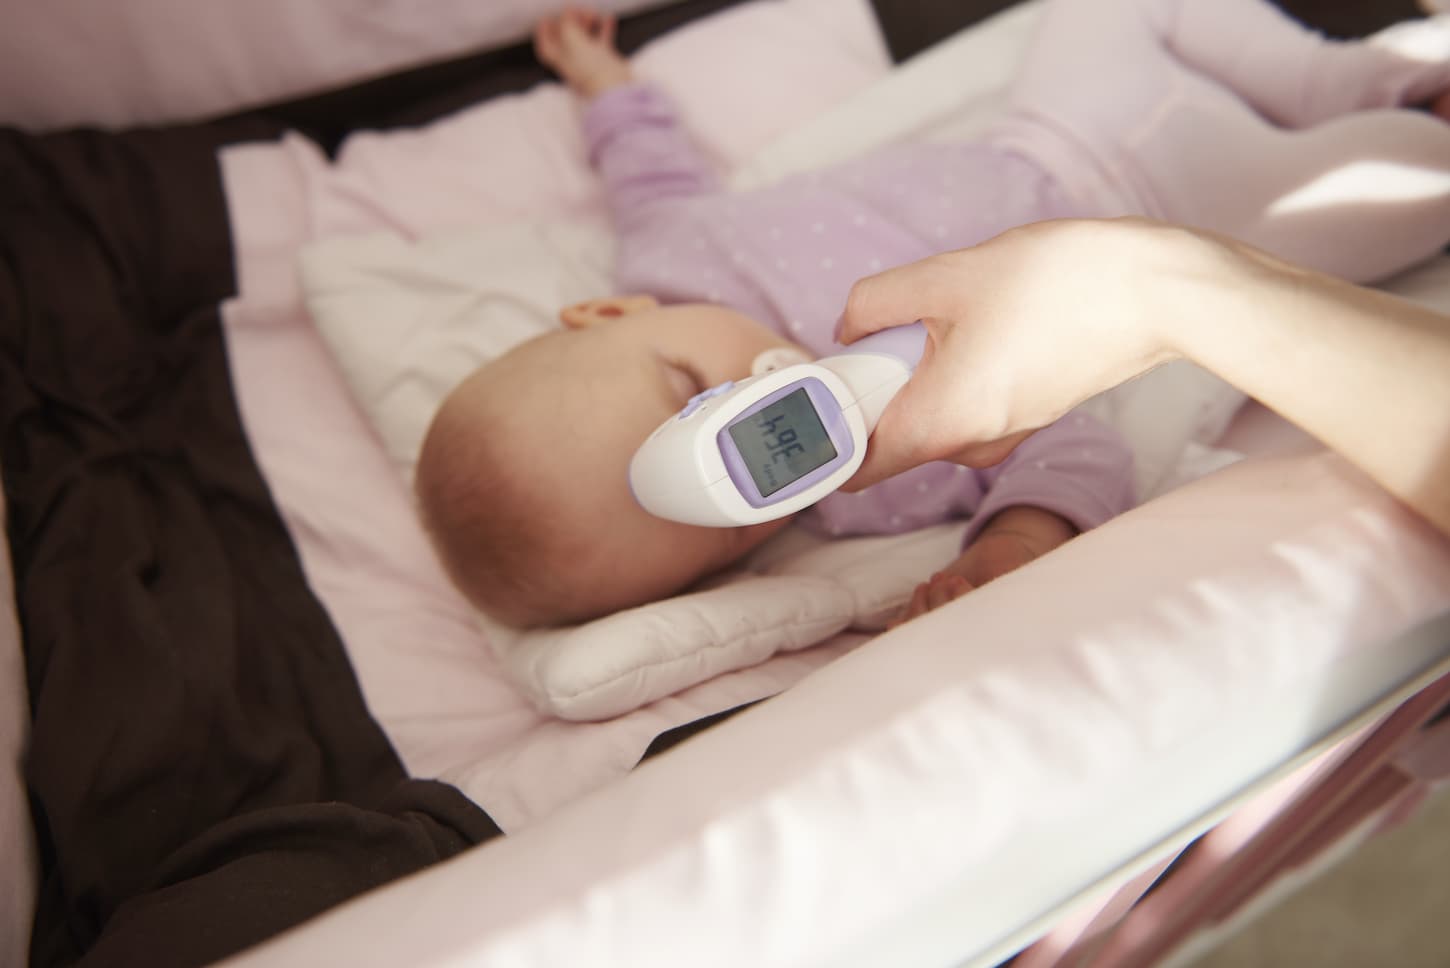 An image of a sleeping sick baby with a thermometer focused at the front of the camera.